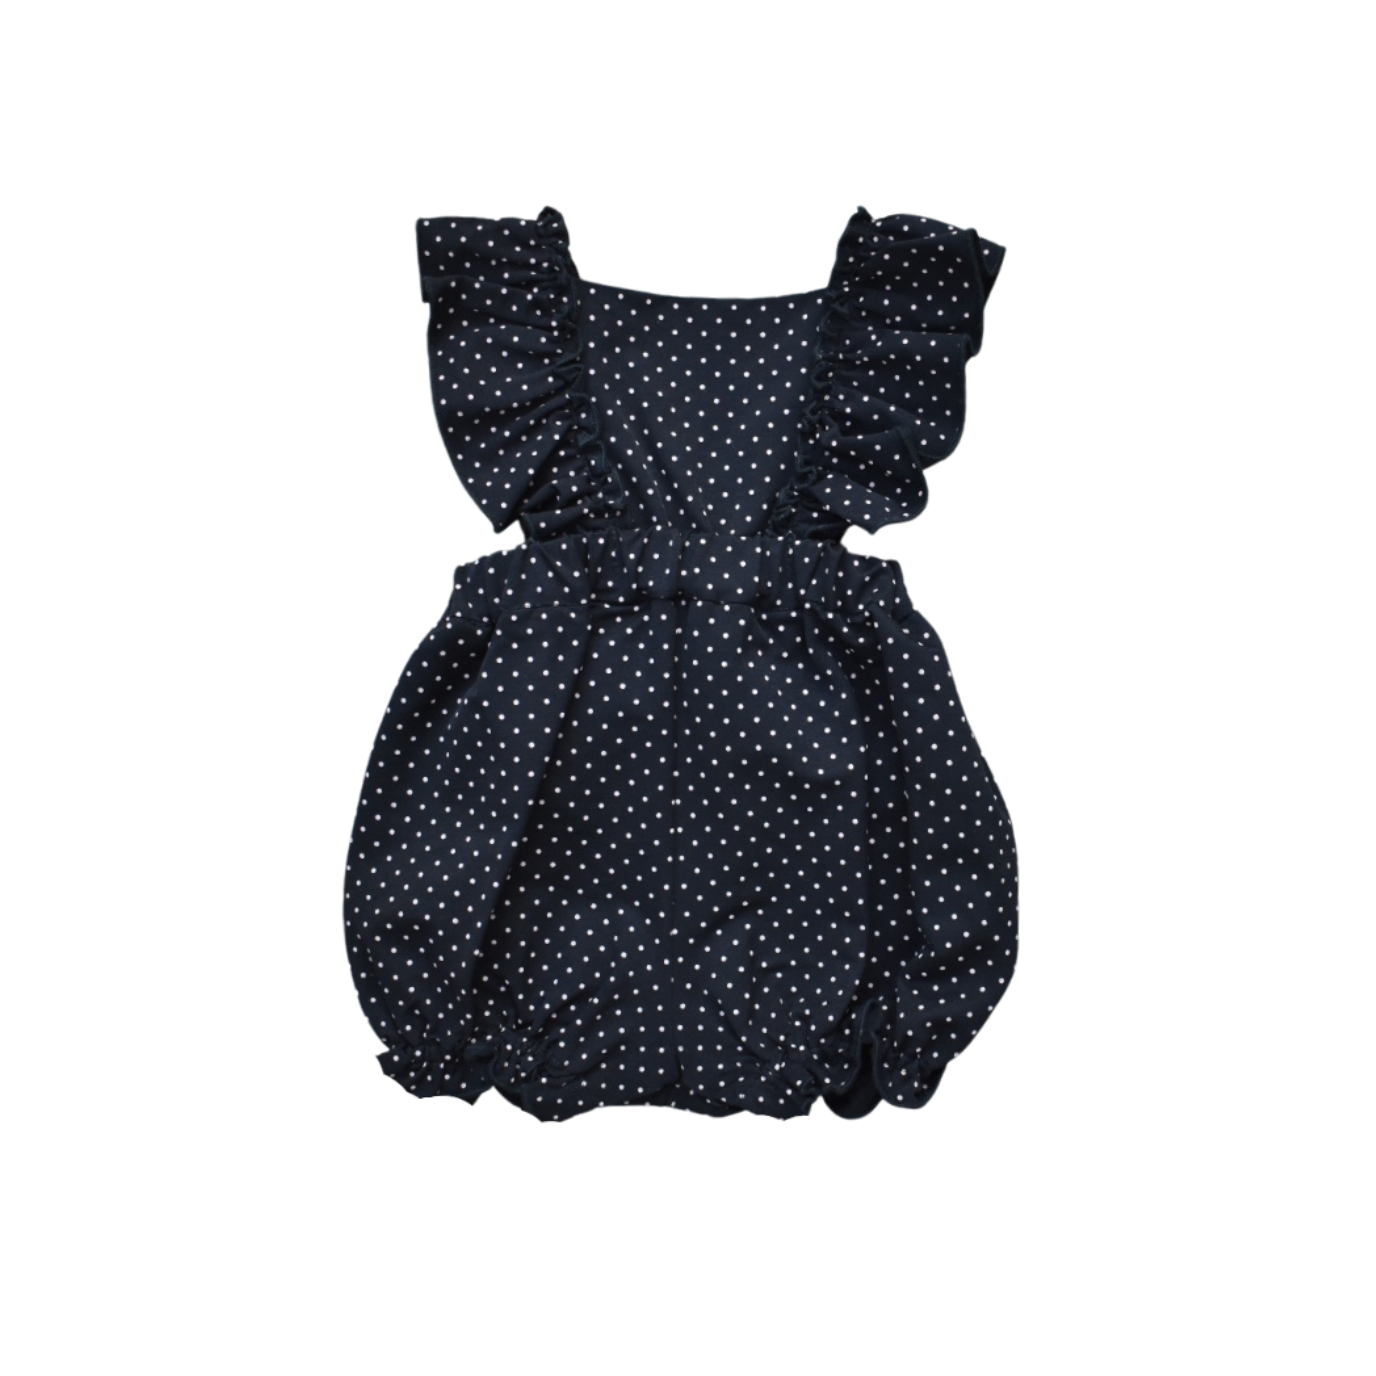 mary romper in black with pink dot